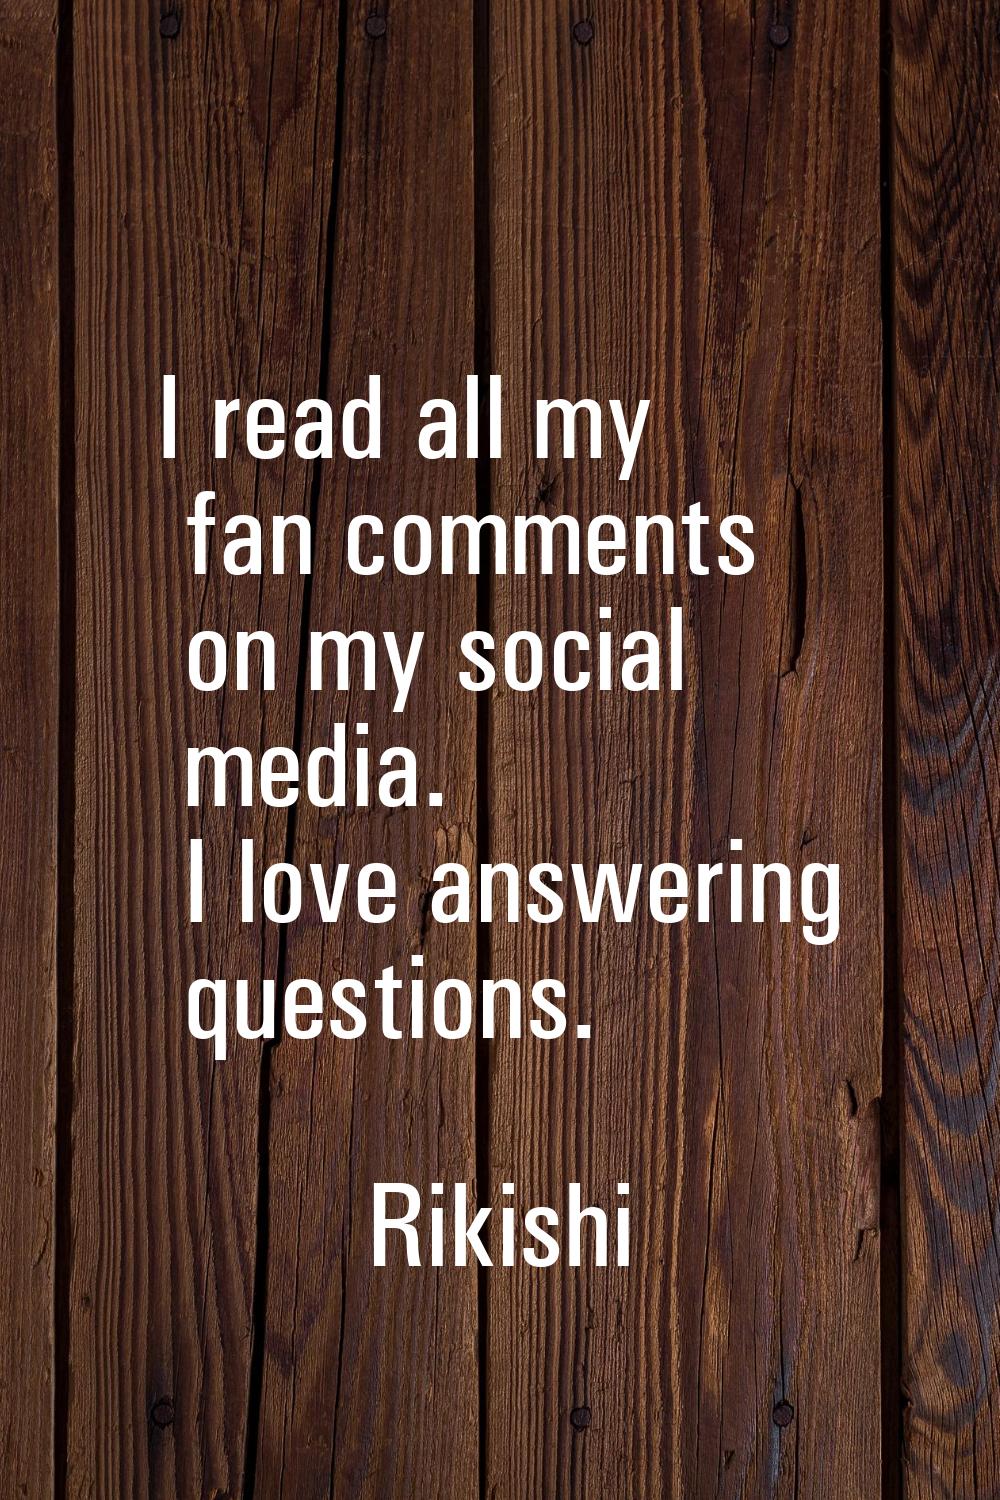 I read all my fan comments on my social media. I love answering questions.